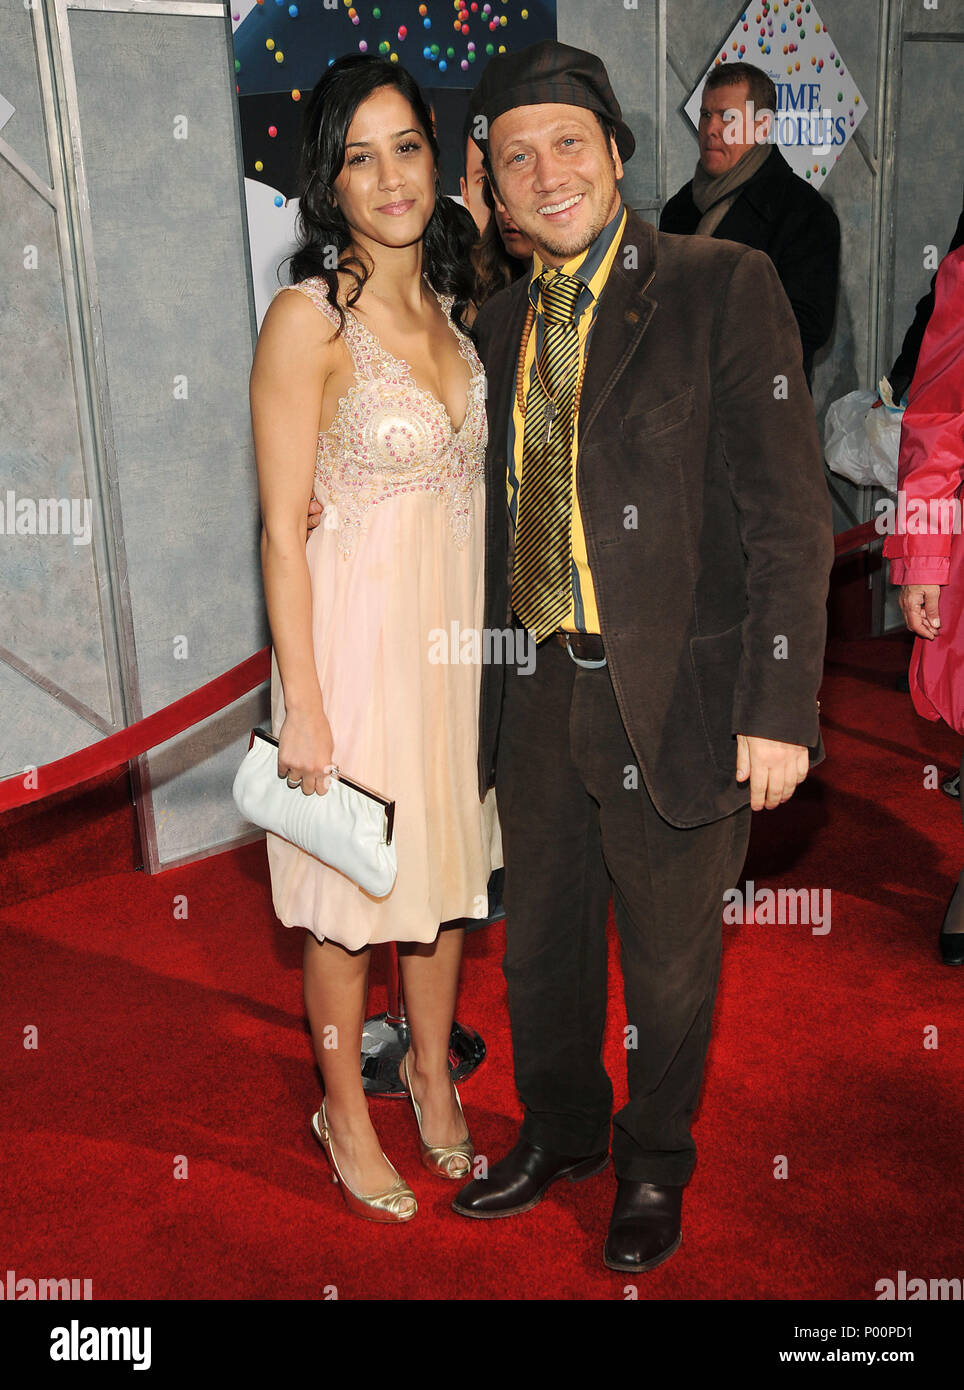 Rob Schneider and wife - Bedtime Stories Premiere at the El Capitan Theatre  In Los Angeles. SchneiderRob wife 47 Event in Hollywood Life - California,  Red Carpet Event, USA, Film Industry, Celebrities,